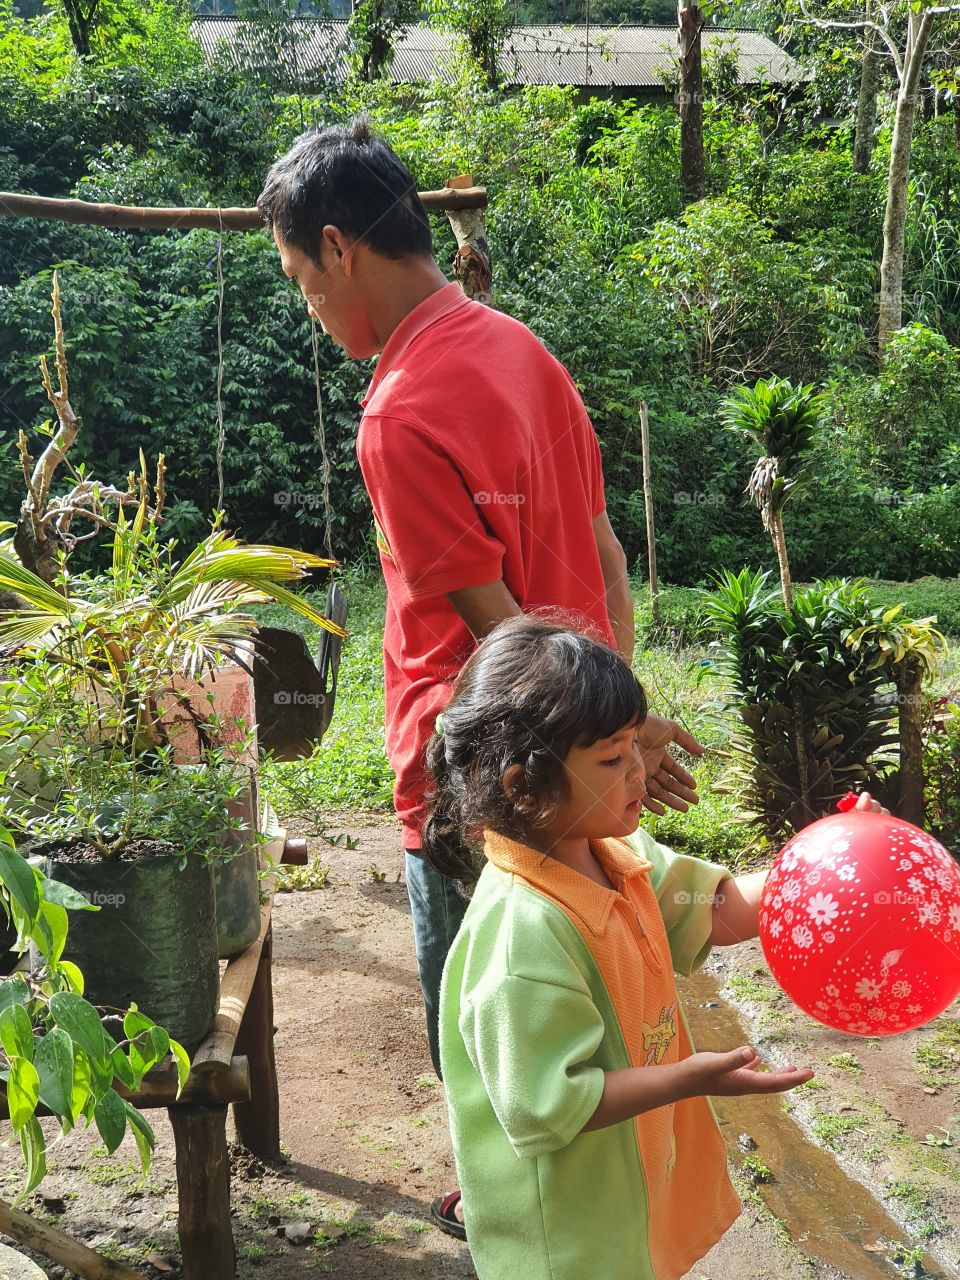 a father in a red shirt is looking at flowers in the yard with his daughter holding a balloon